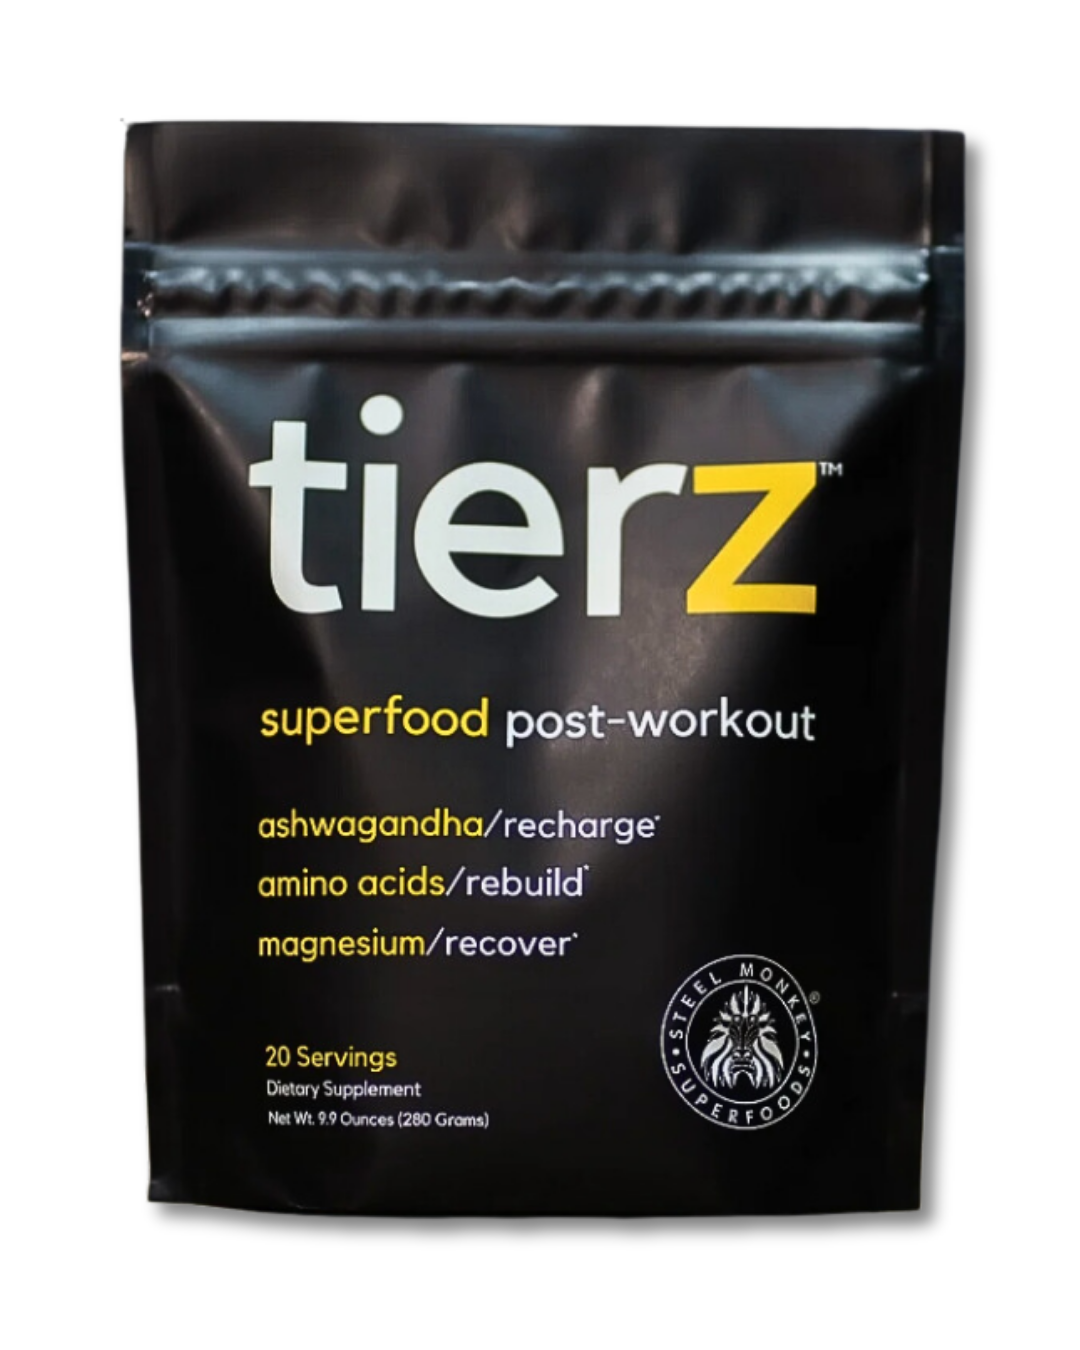 tierz superfood post-workout